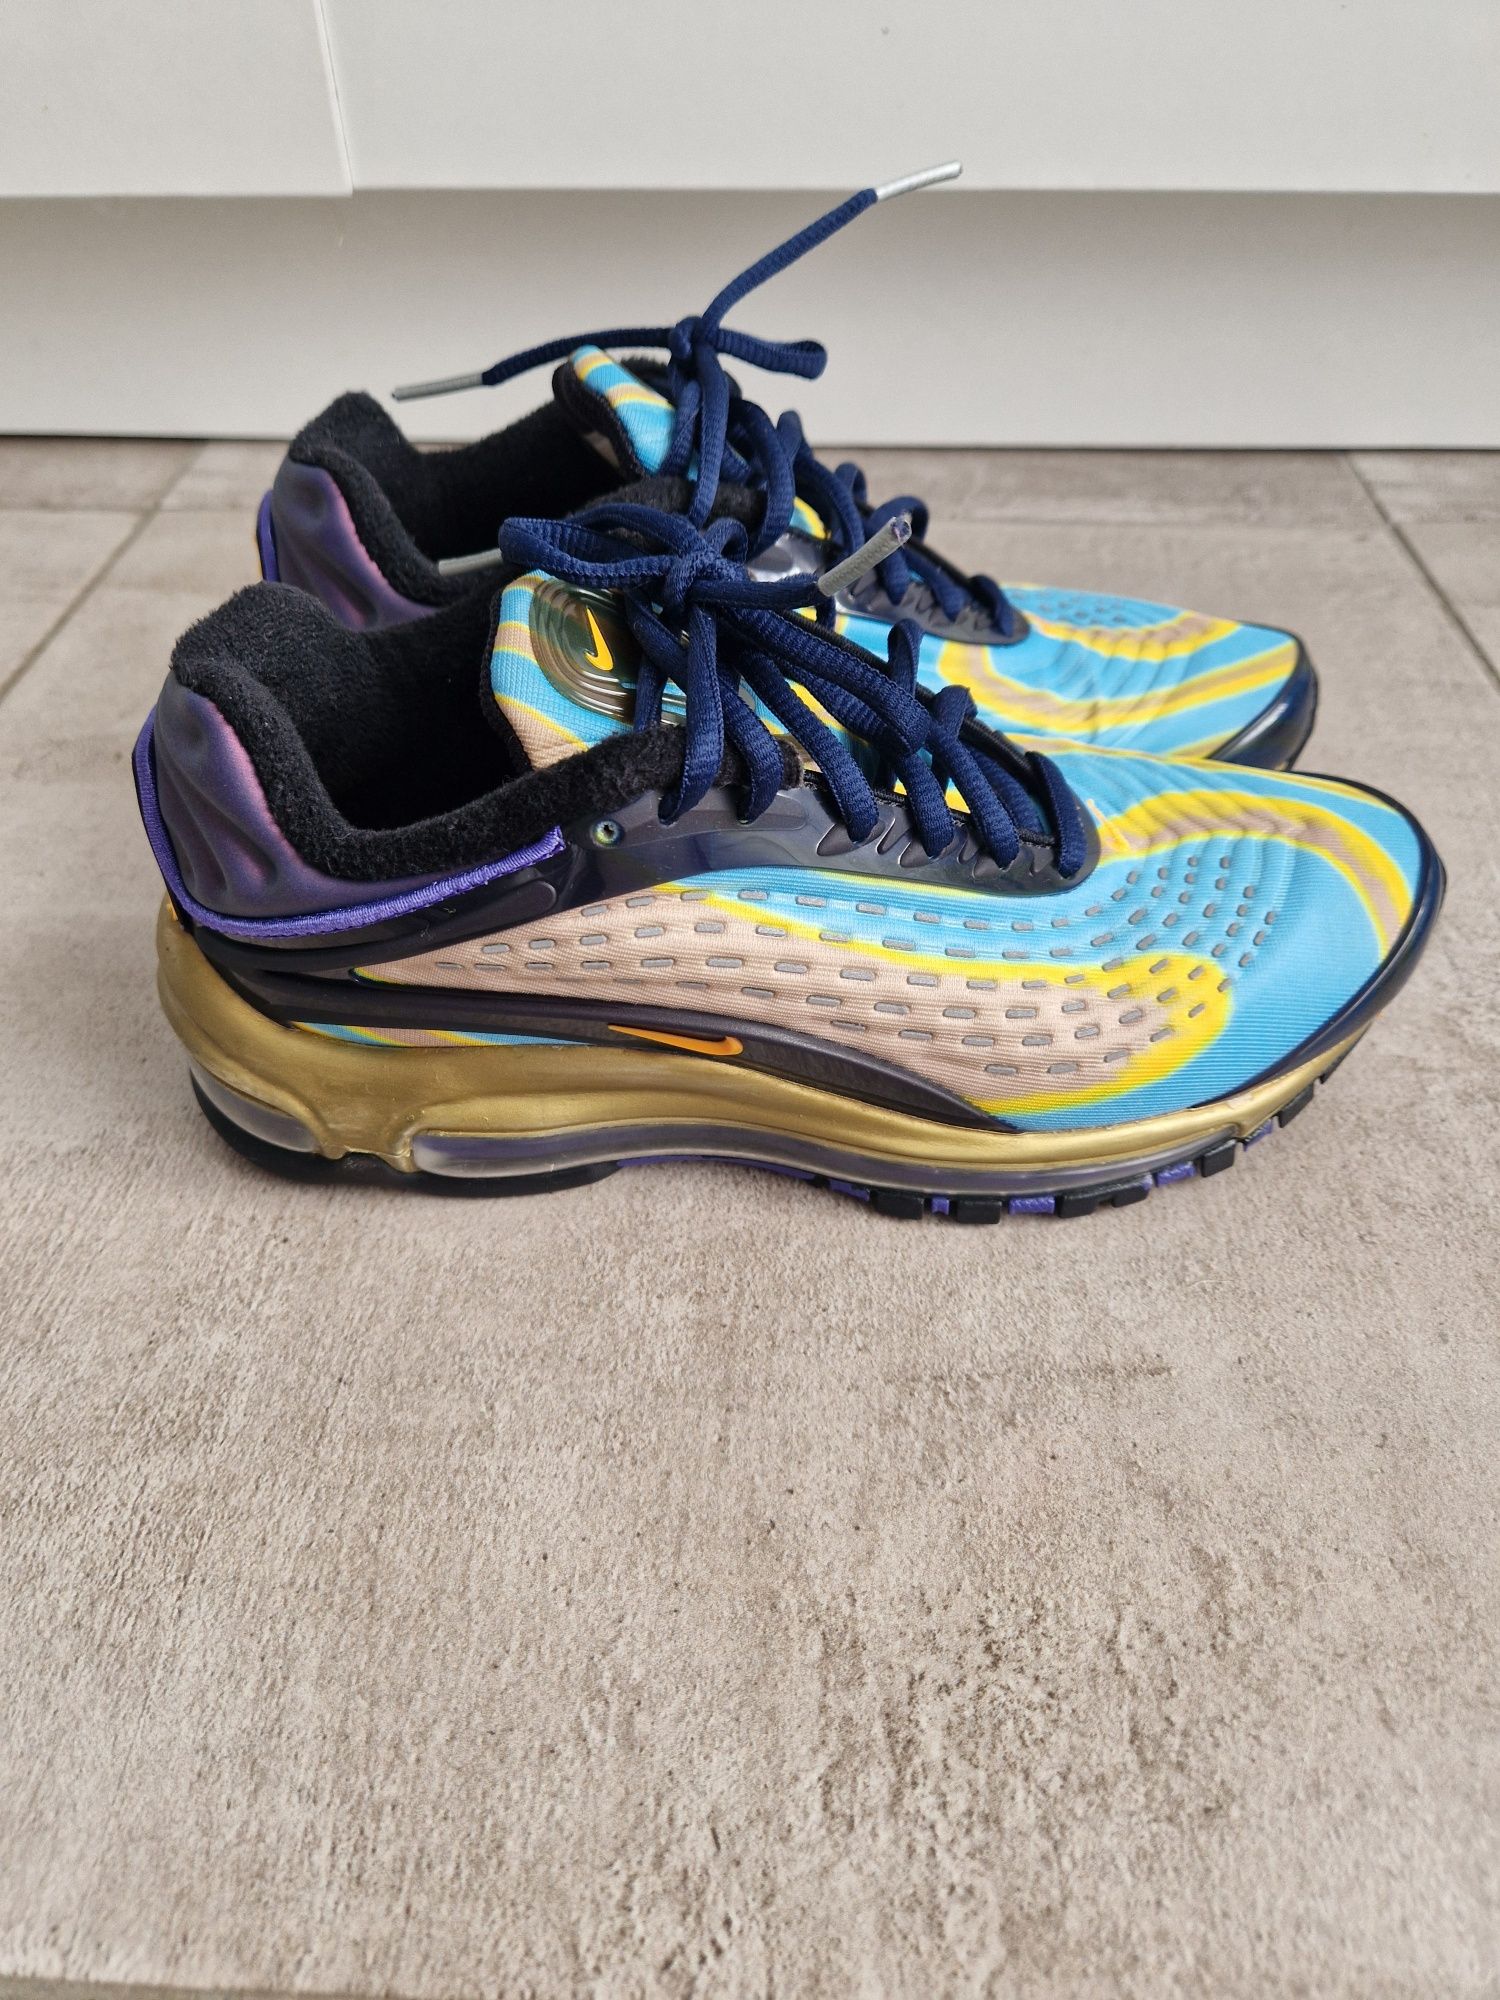 Nike air max deluxe !